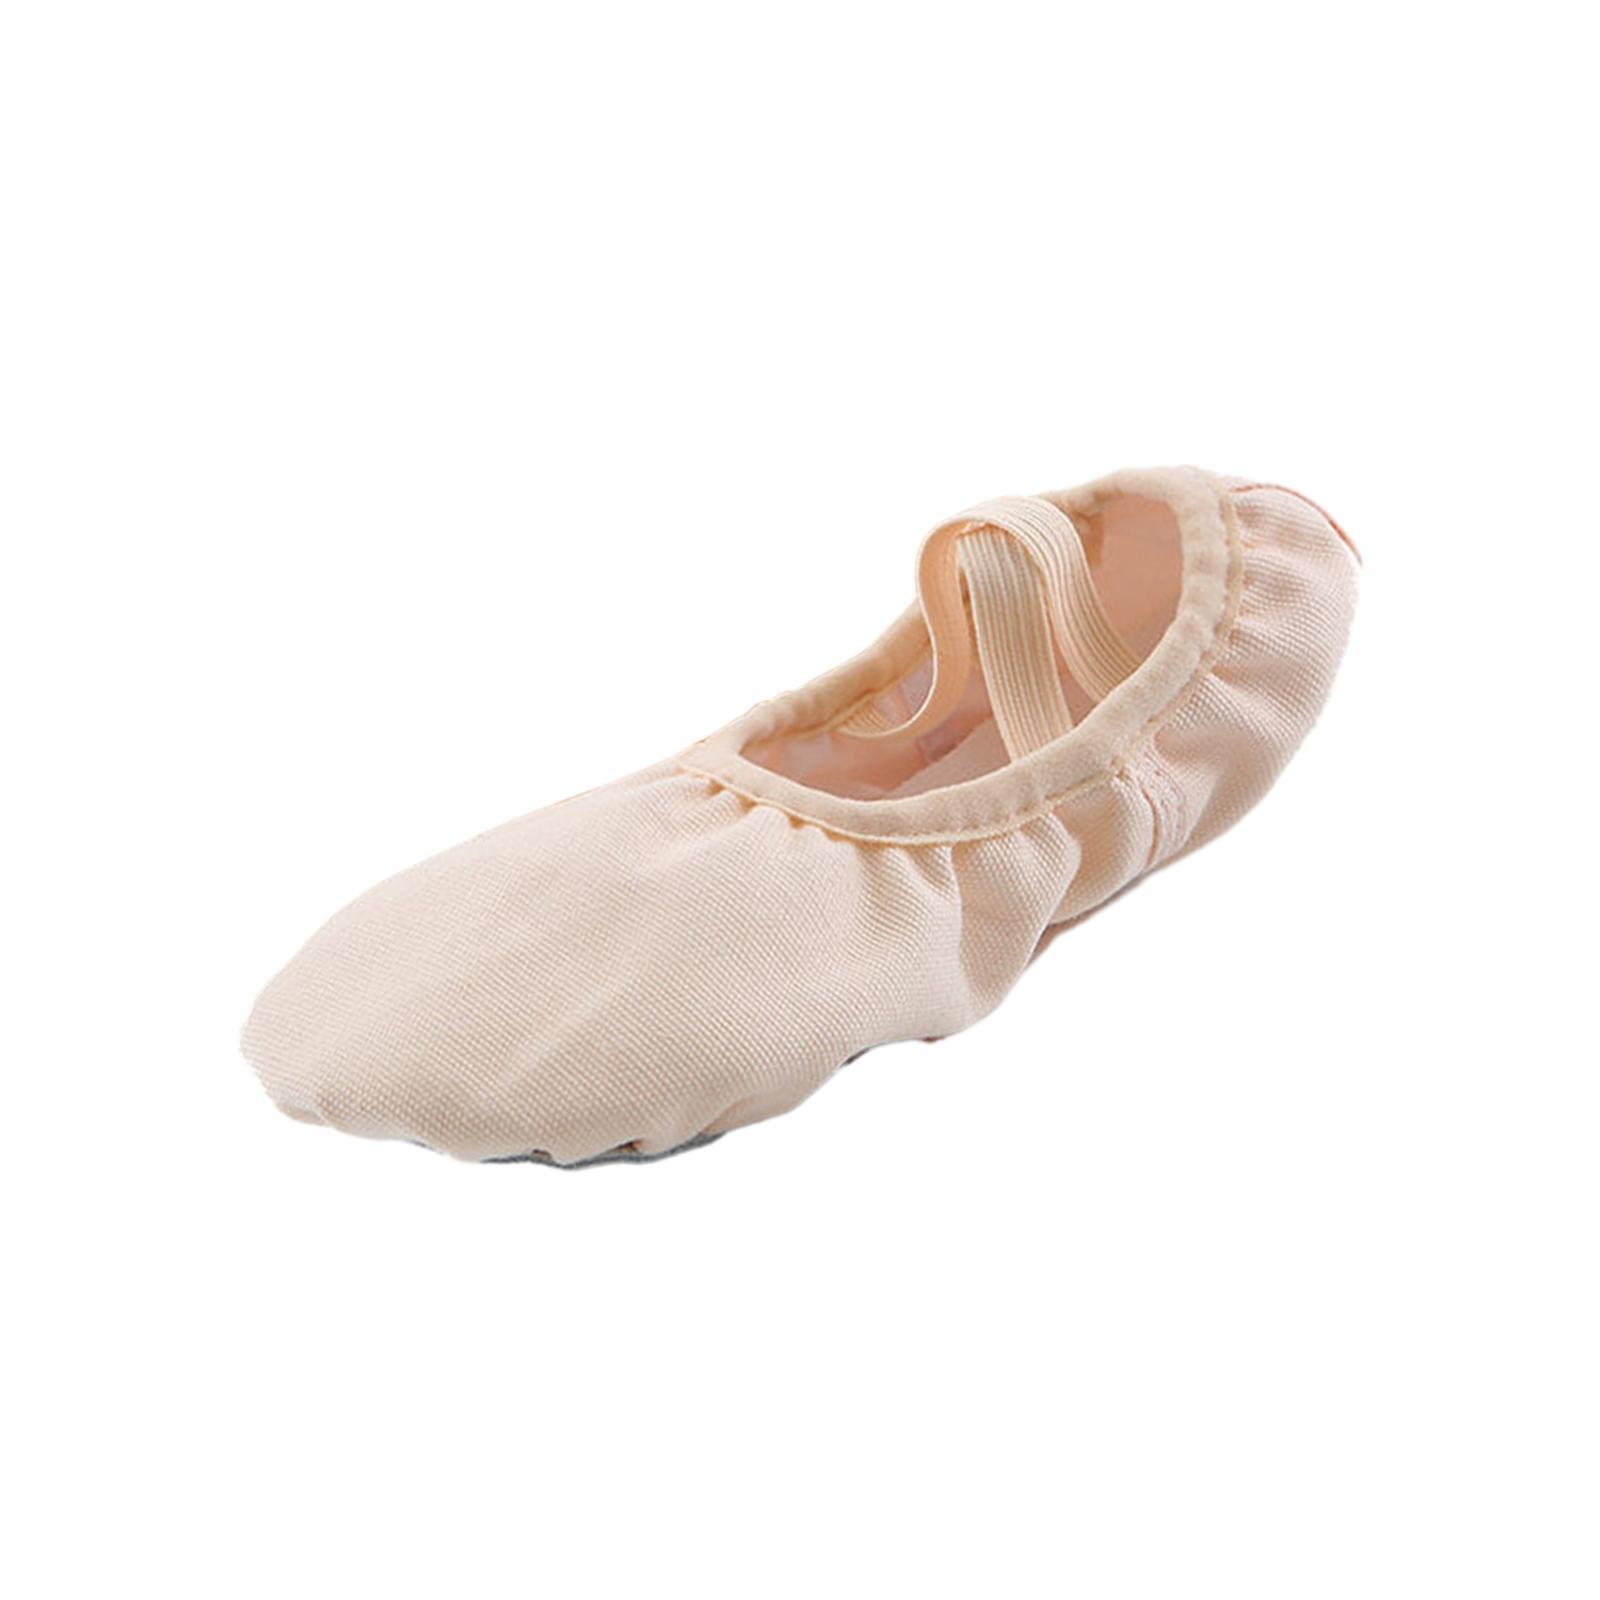 Woman Dance Shoes Gymnastic Shoes Practice Ballet Dance Shoes for Girls Kids